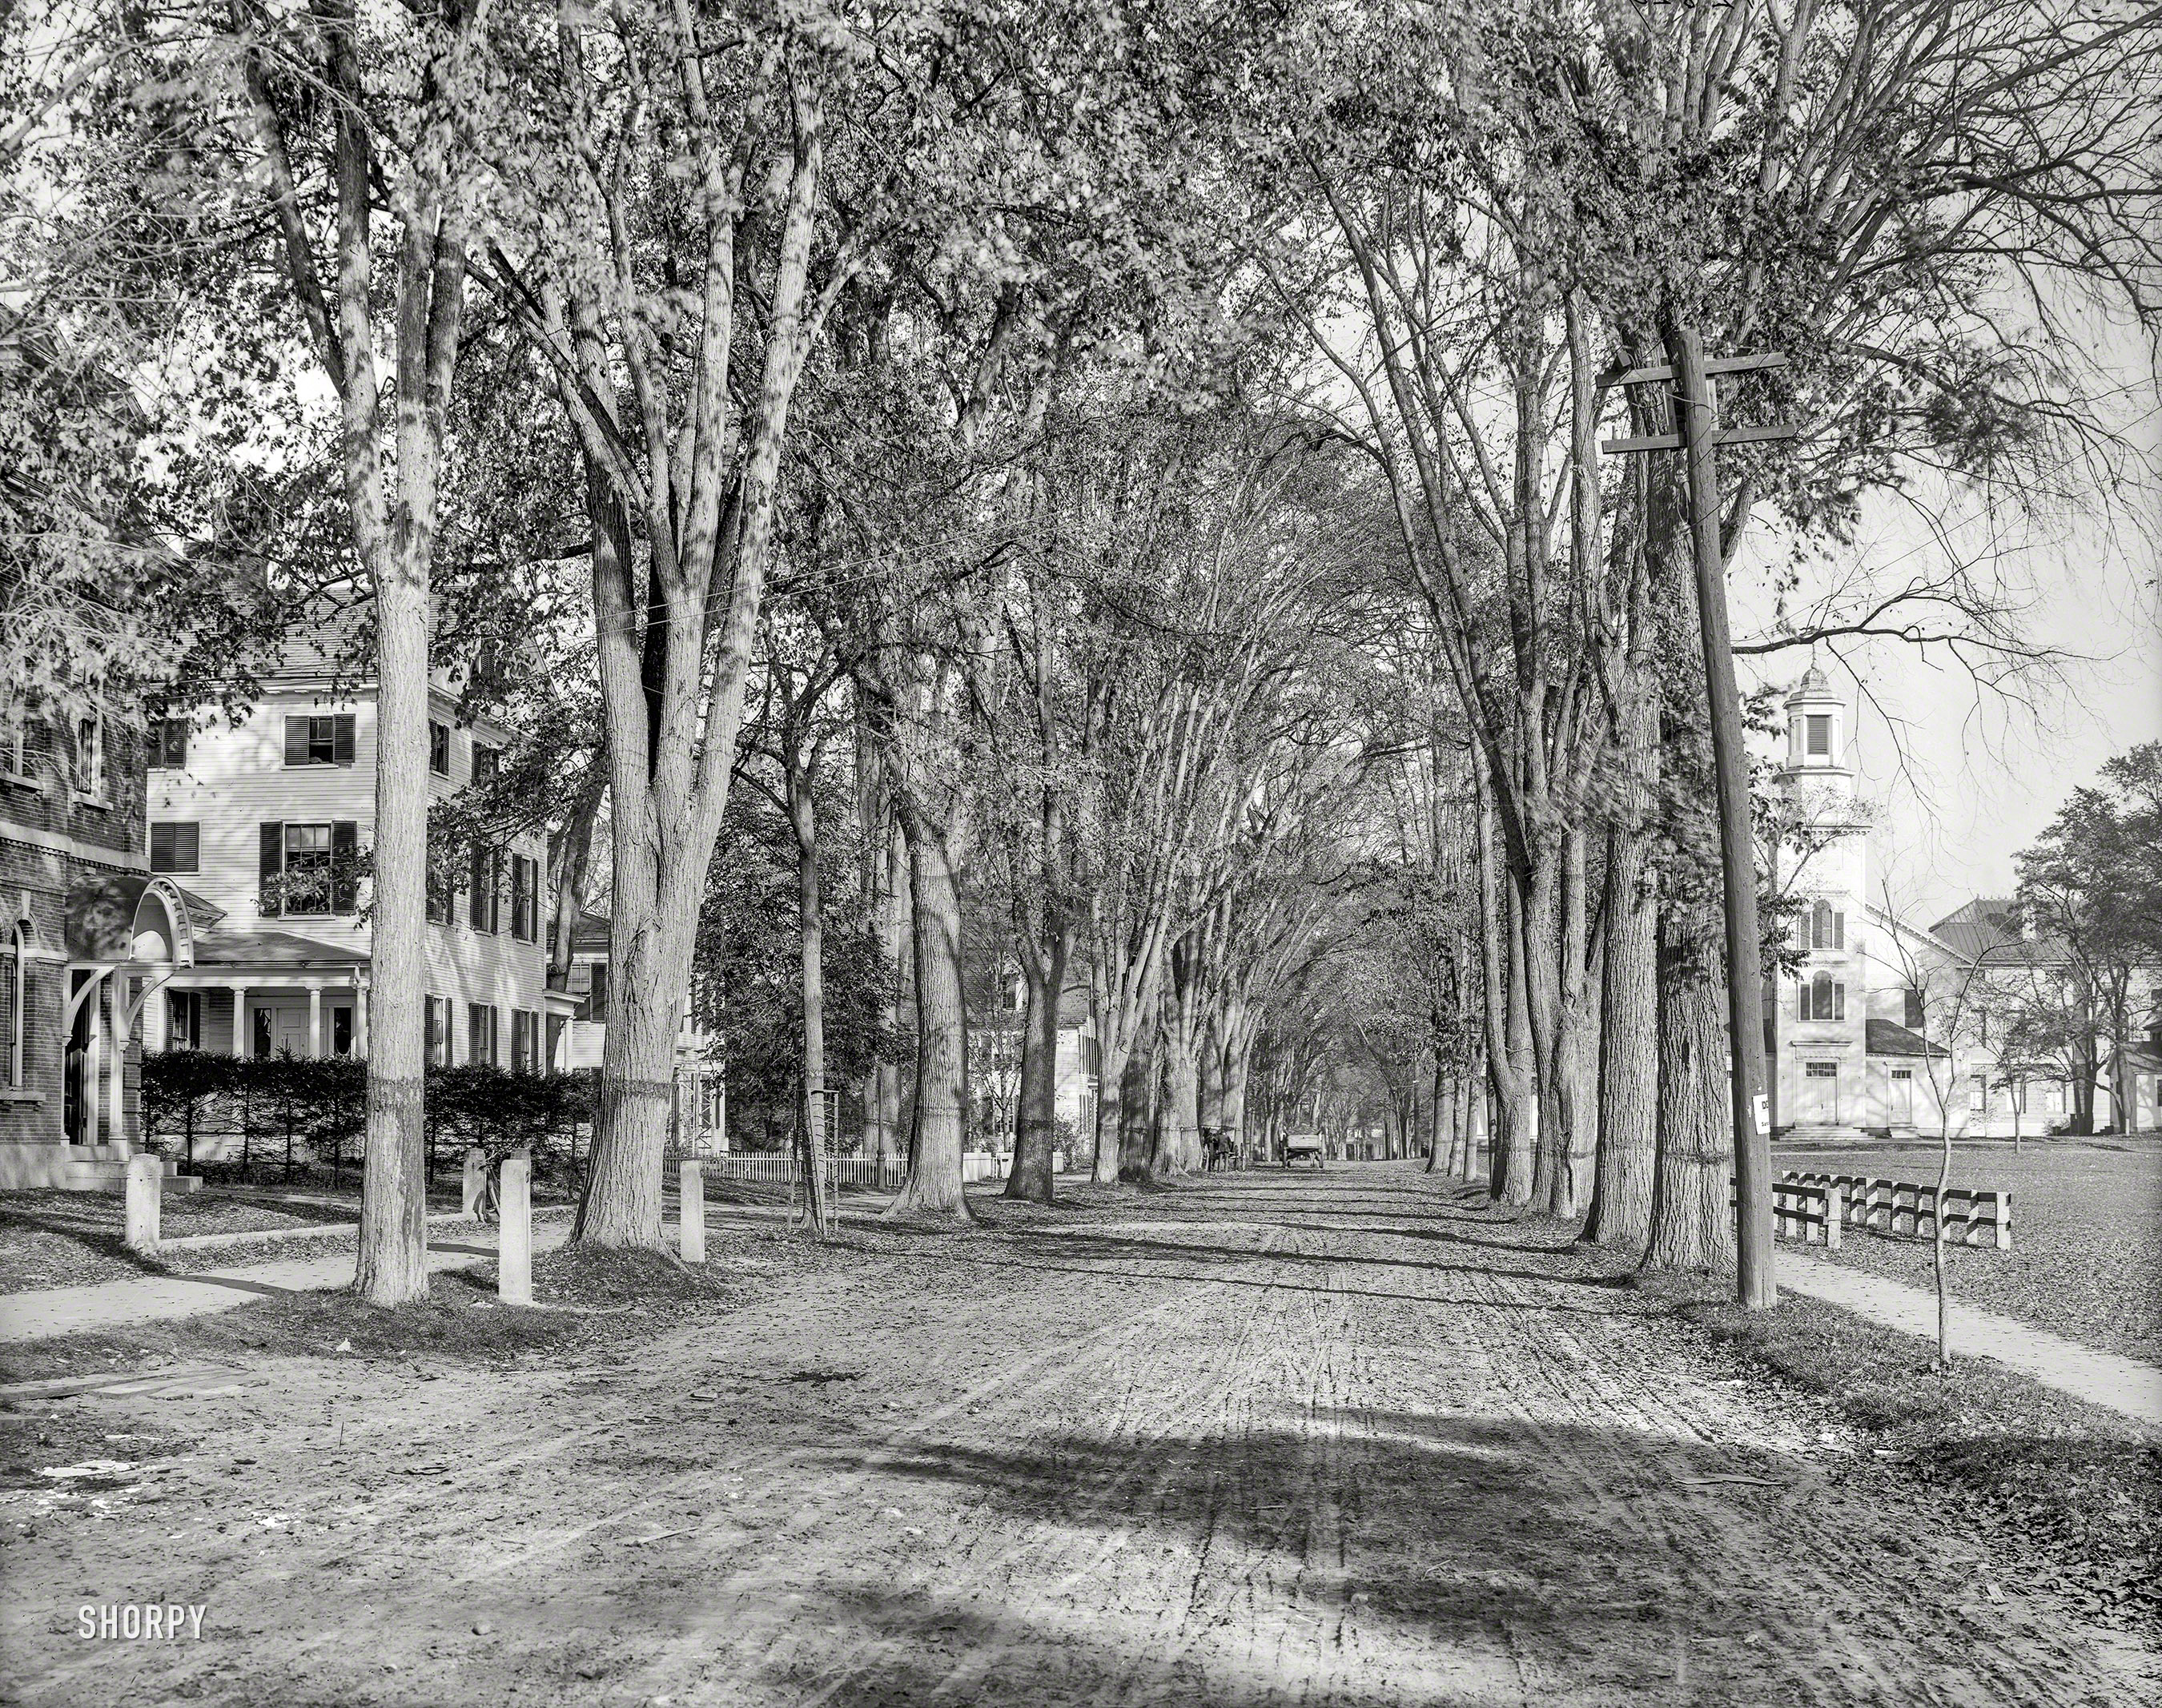 Hanover, New Hampshire, circa 1900. "North Main Street, Dartmouth College." 8x10 inch dry plate glass negative, Detroit Publishing Company. View full size.